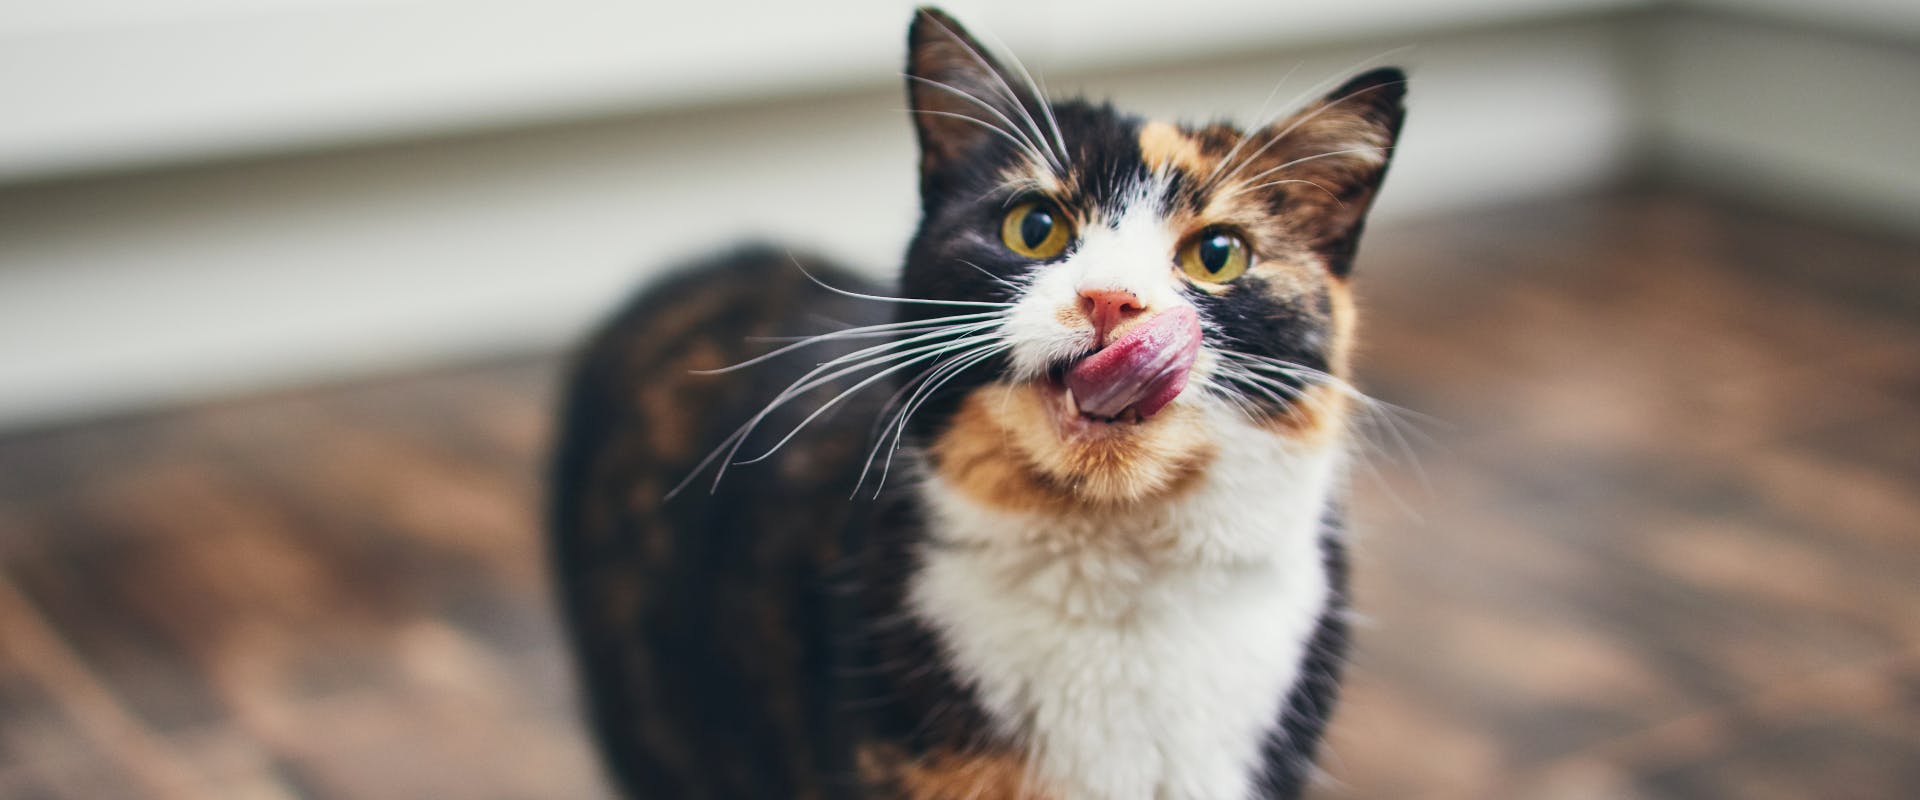 a calico cat with yellow eyes licking its lips